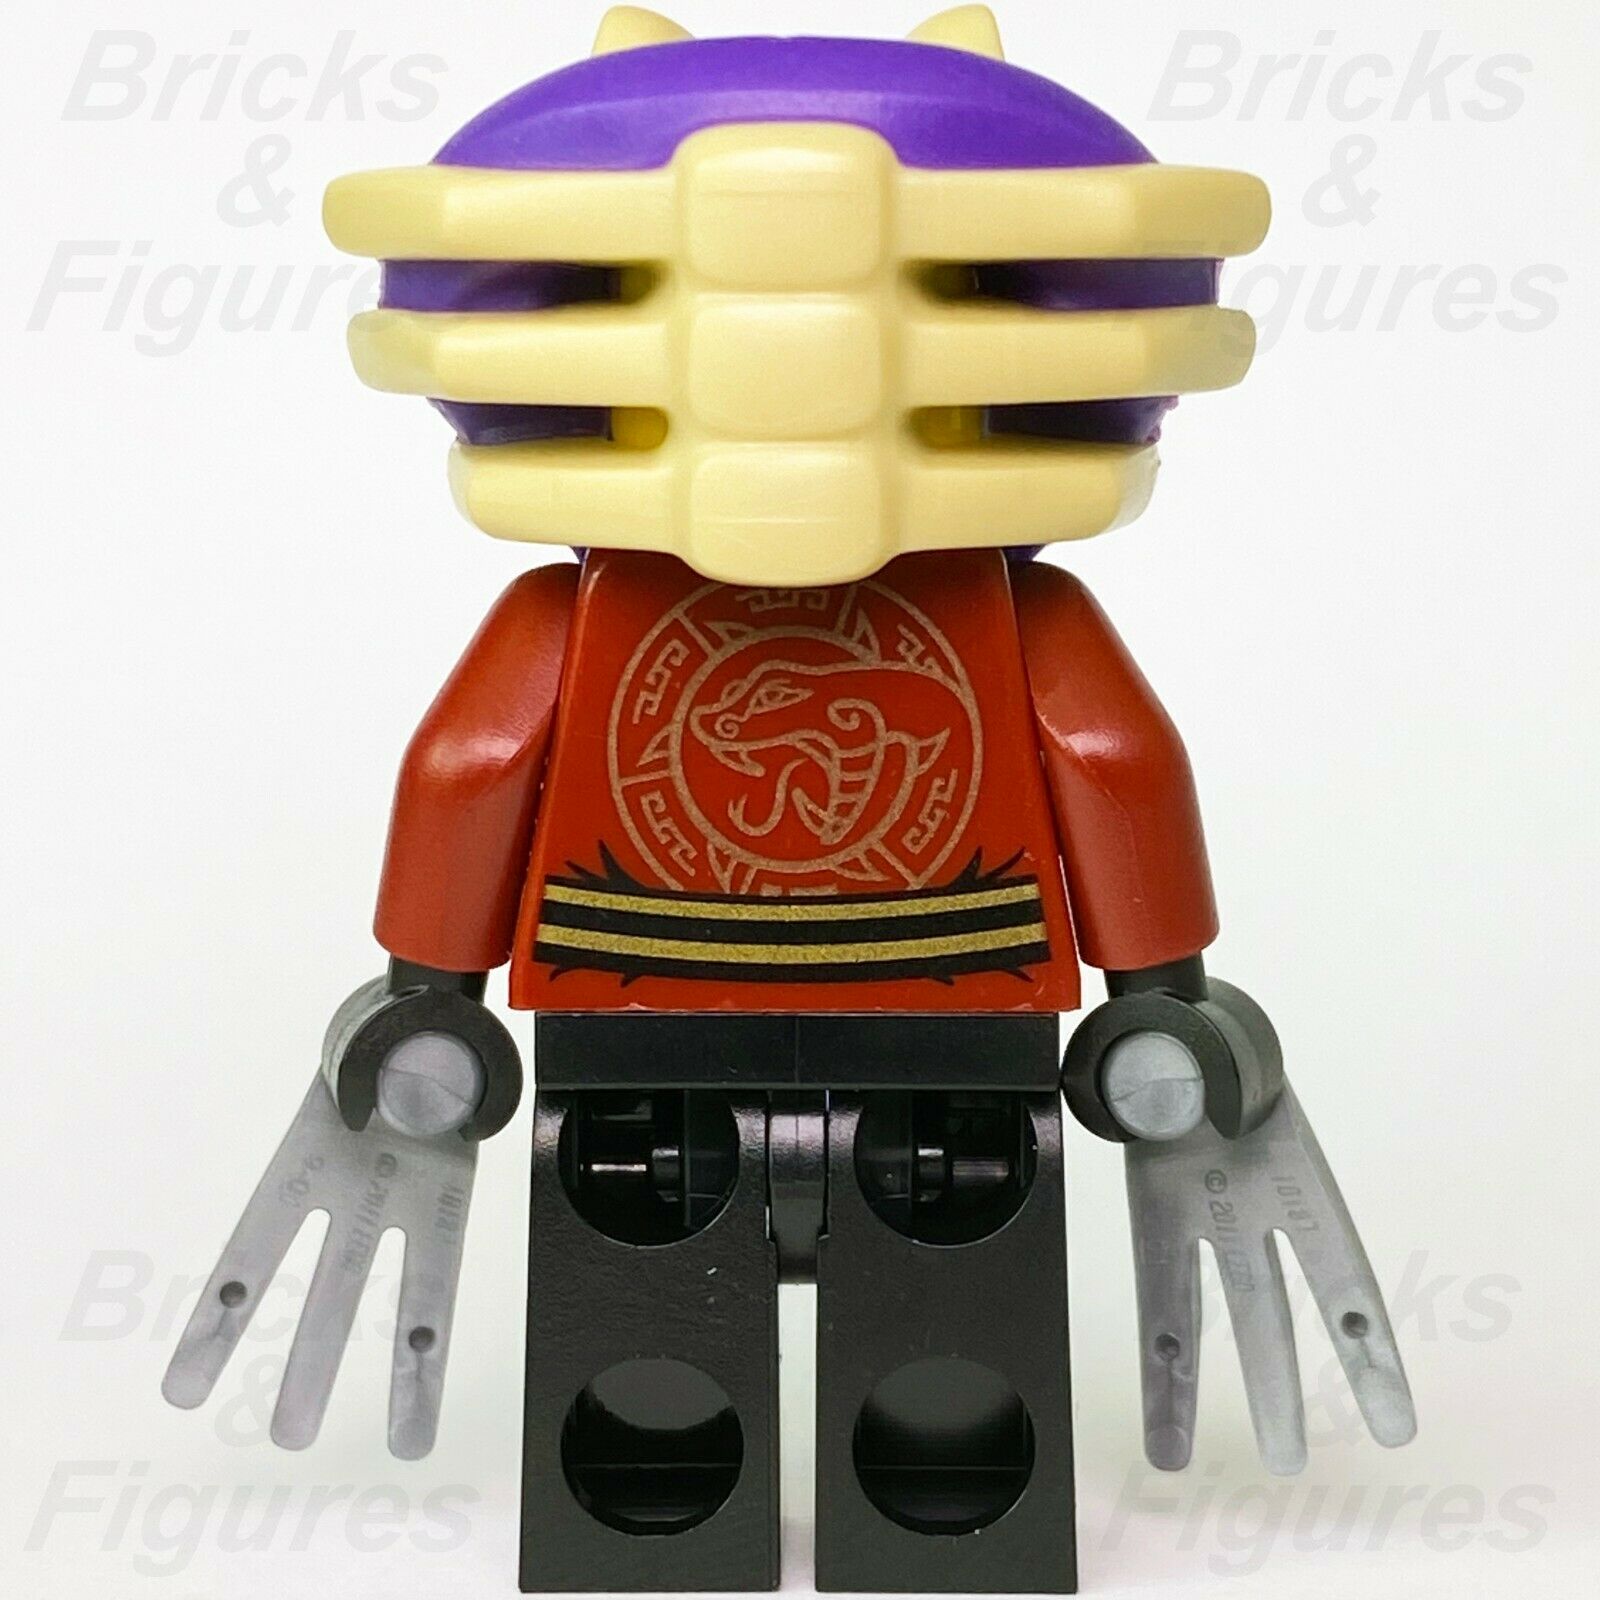 New Ninjago LEGO Master Chen Day of the Departed Minifigure 70746 70595 - Bricks & Figures